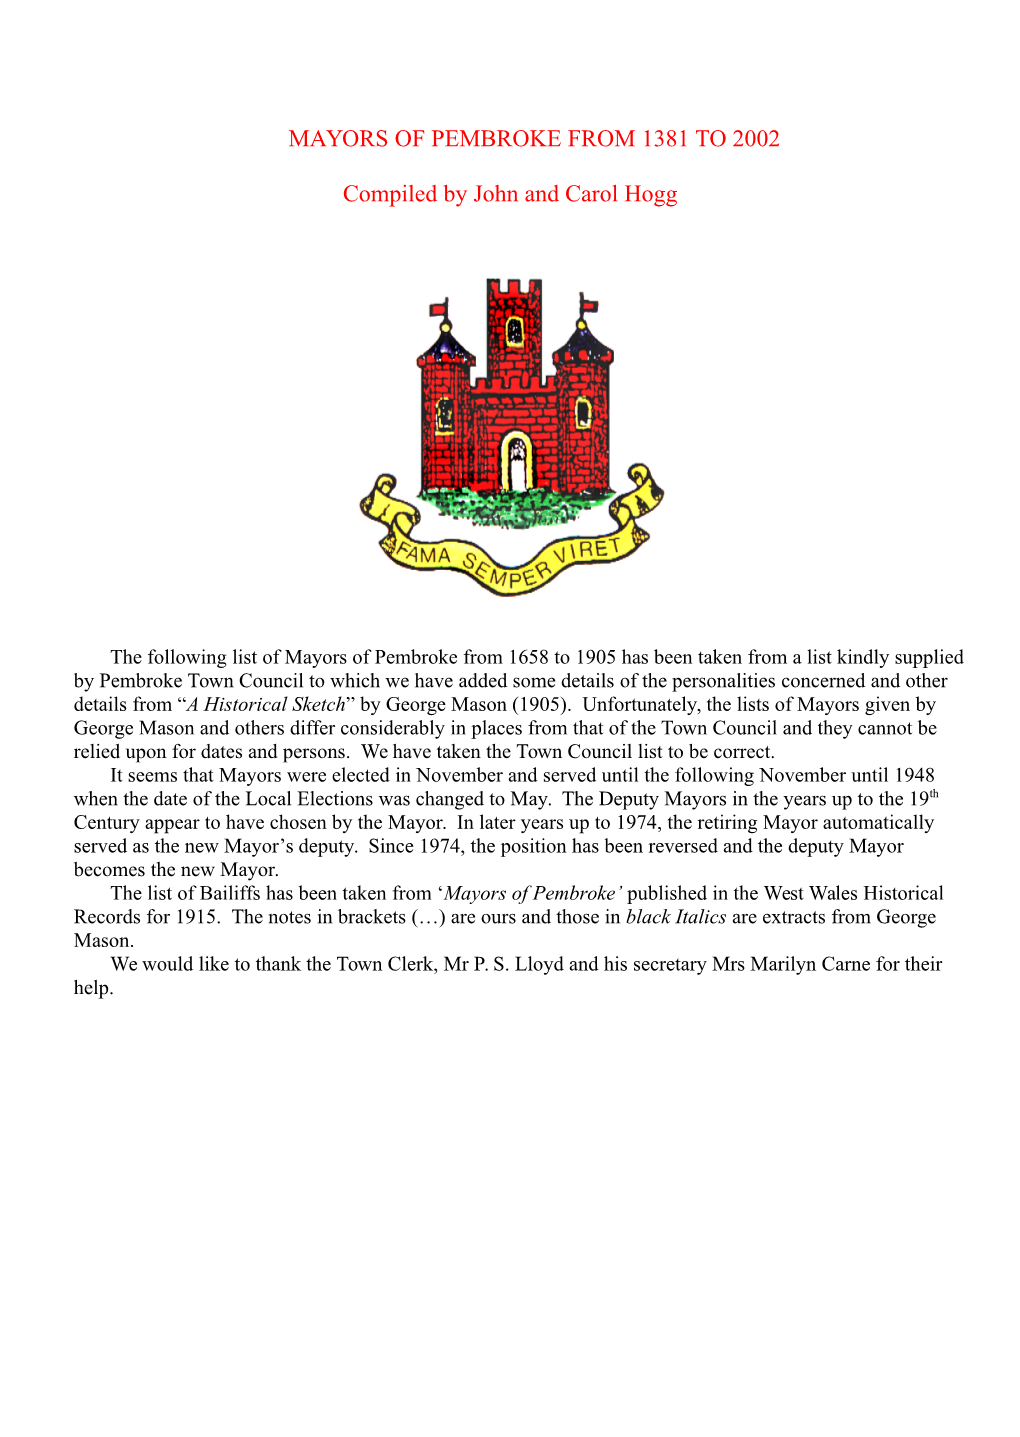 MAYORS of PEMBROKE from 1381 to 2002 Compiled by John